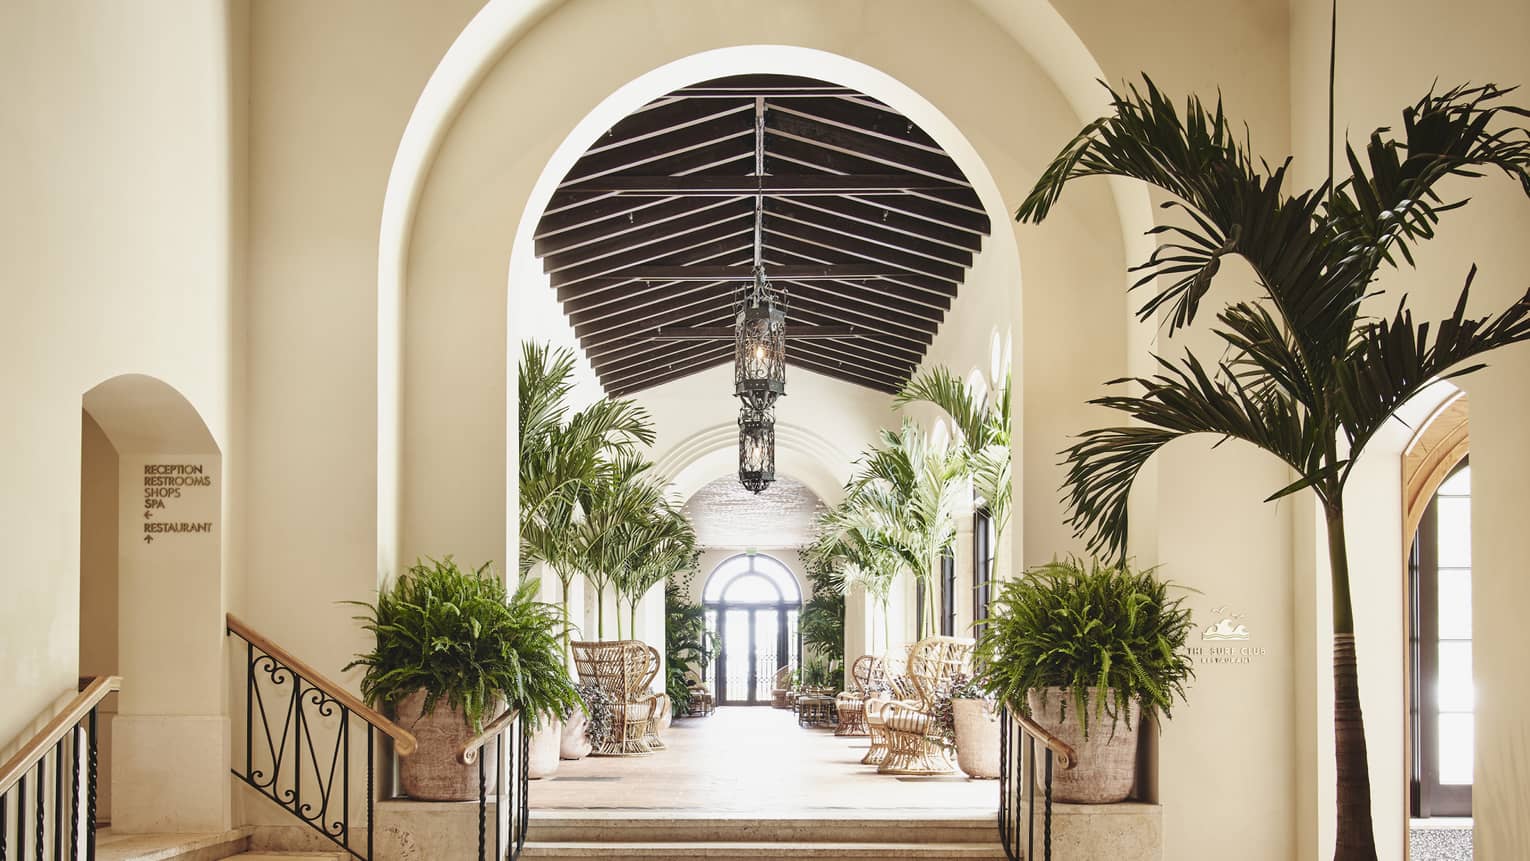 A white archway leading into a hallway with plants on both sides and large lamps hanging from the ceiling.